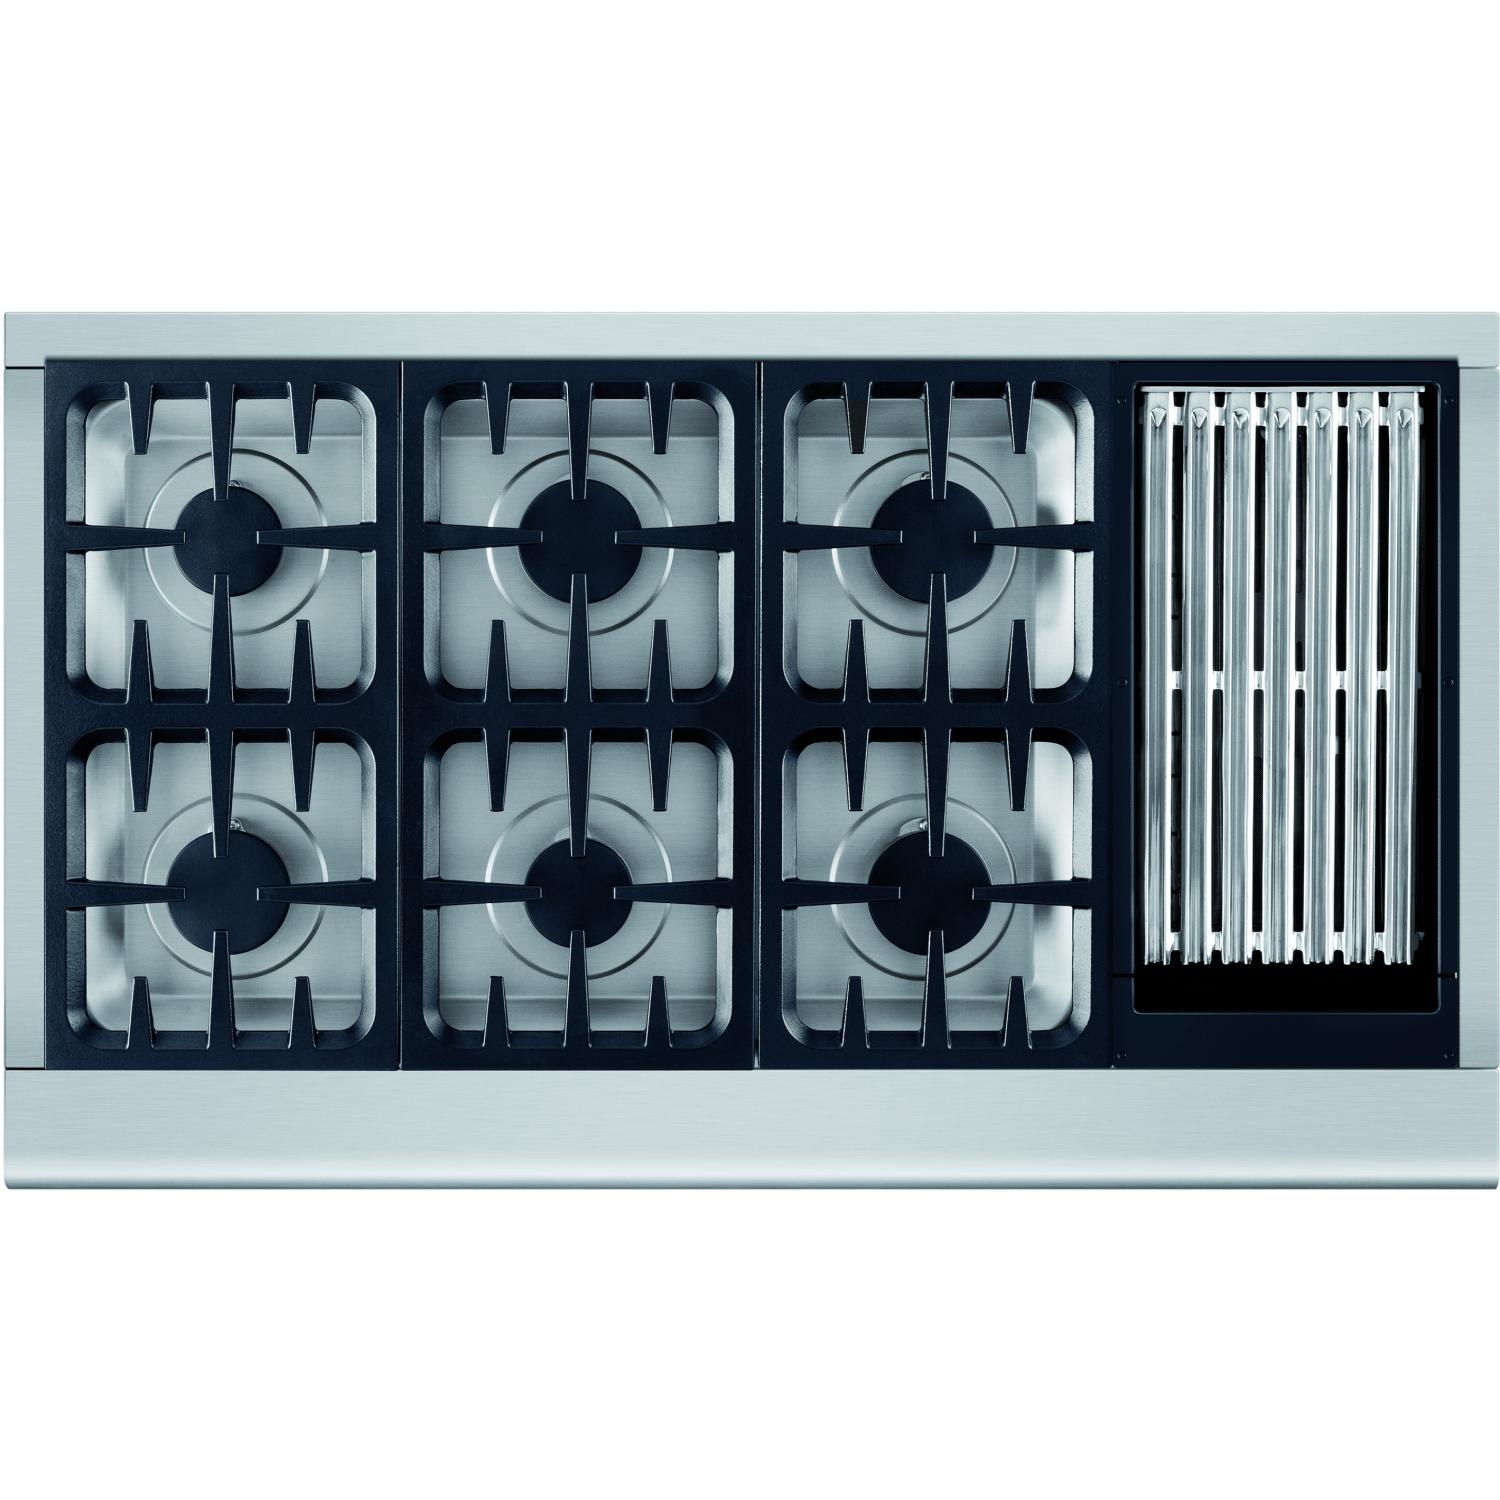 Dcs Professional 48-inch 6-burner Propane Gas Cooktop With Grill By Fisher Paykel - Cpv-486gl-l